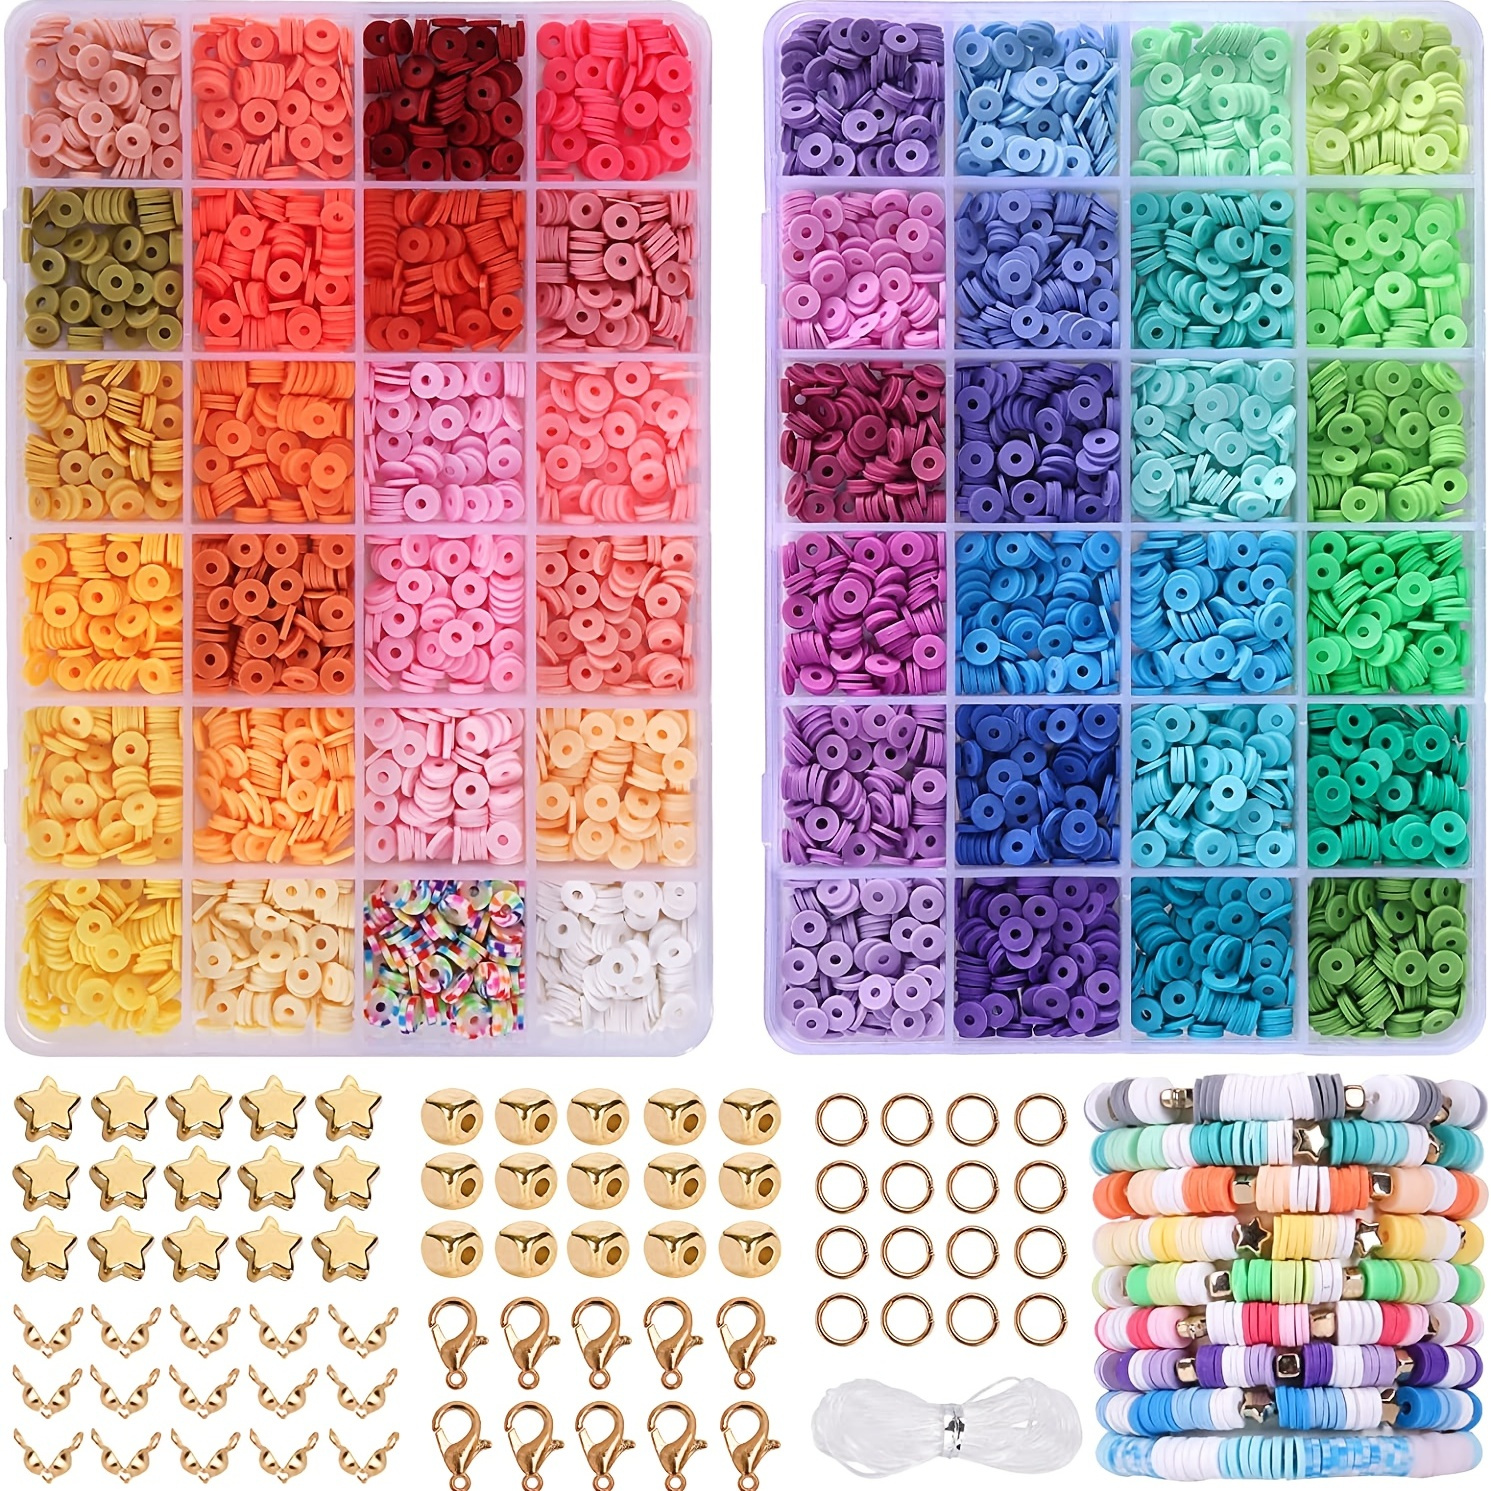 1Set 6mm Clay Beads for Bracelets Making, Clay Bead Kit with Kinds of  Speckled & Mixed Colored Beads, 6mm Heishi Beads Flat Polymer Clay Beads  Kit with Letter Charms Jump Rings Holiday